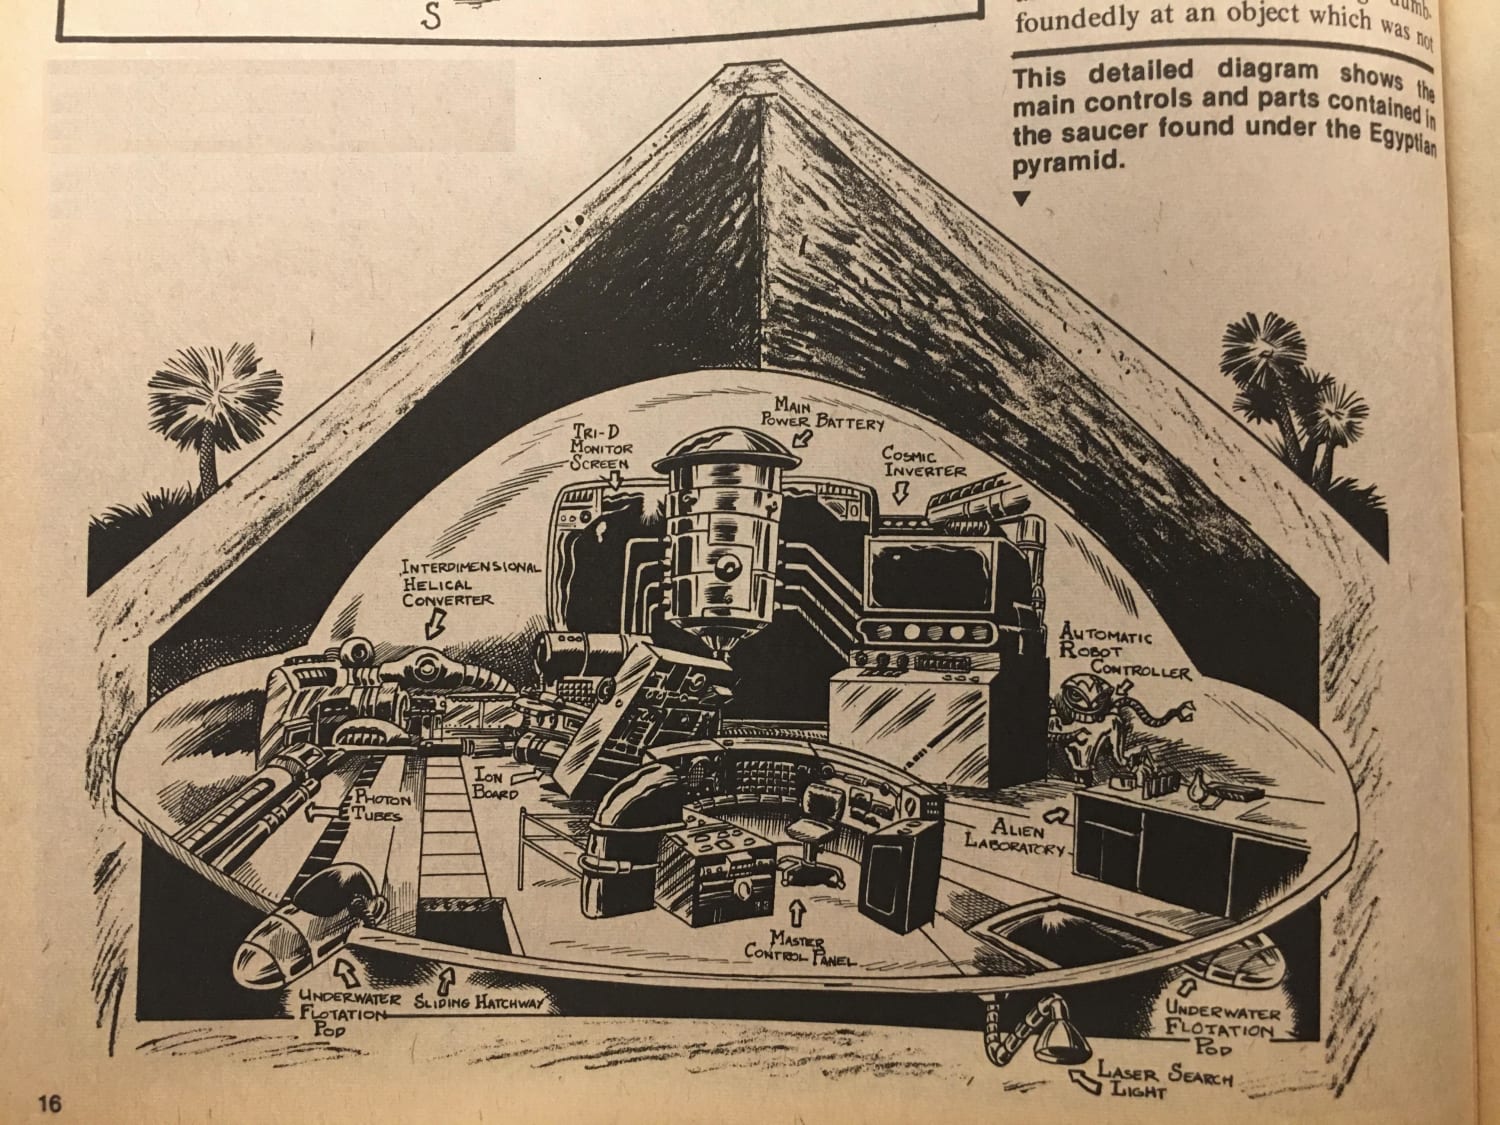 Somewhat fanciful depiction of the inner workings of a UFO, supposedly found under an Egyptian Pyramid